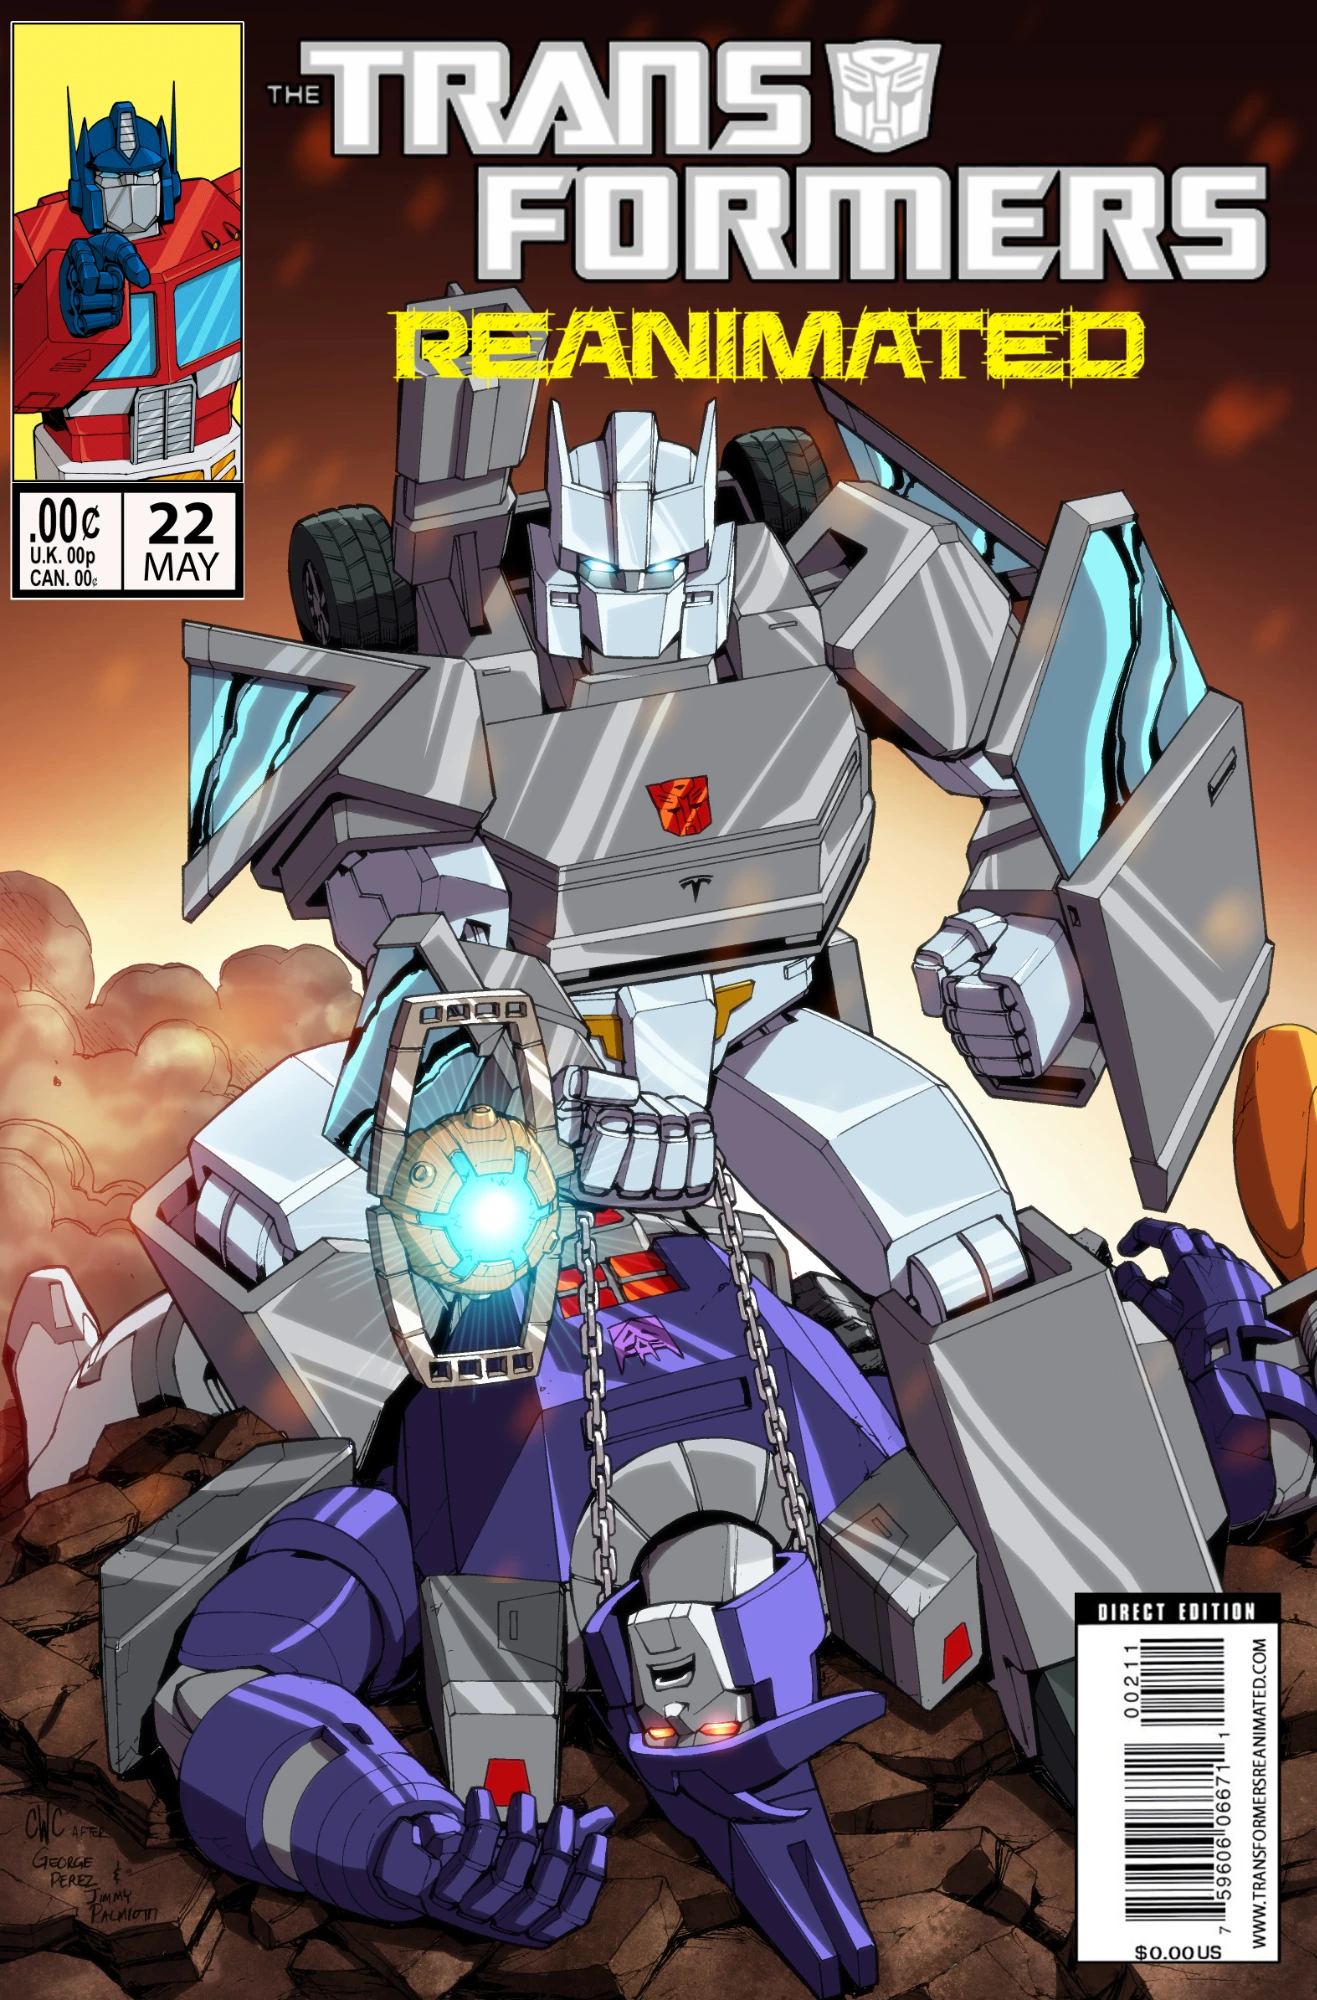 Transformers comic cover with Shatter holding the Matrix while bent over a defeated Galvatron